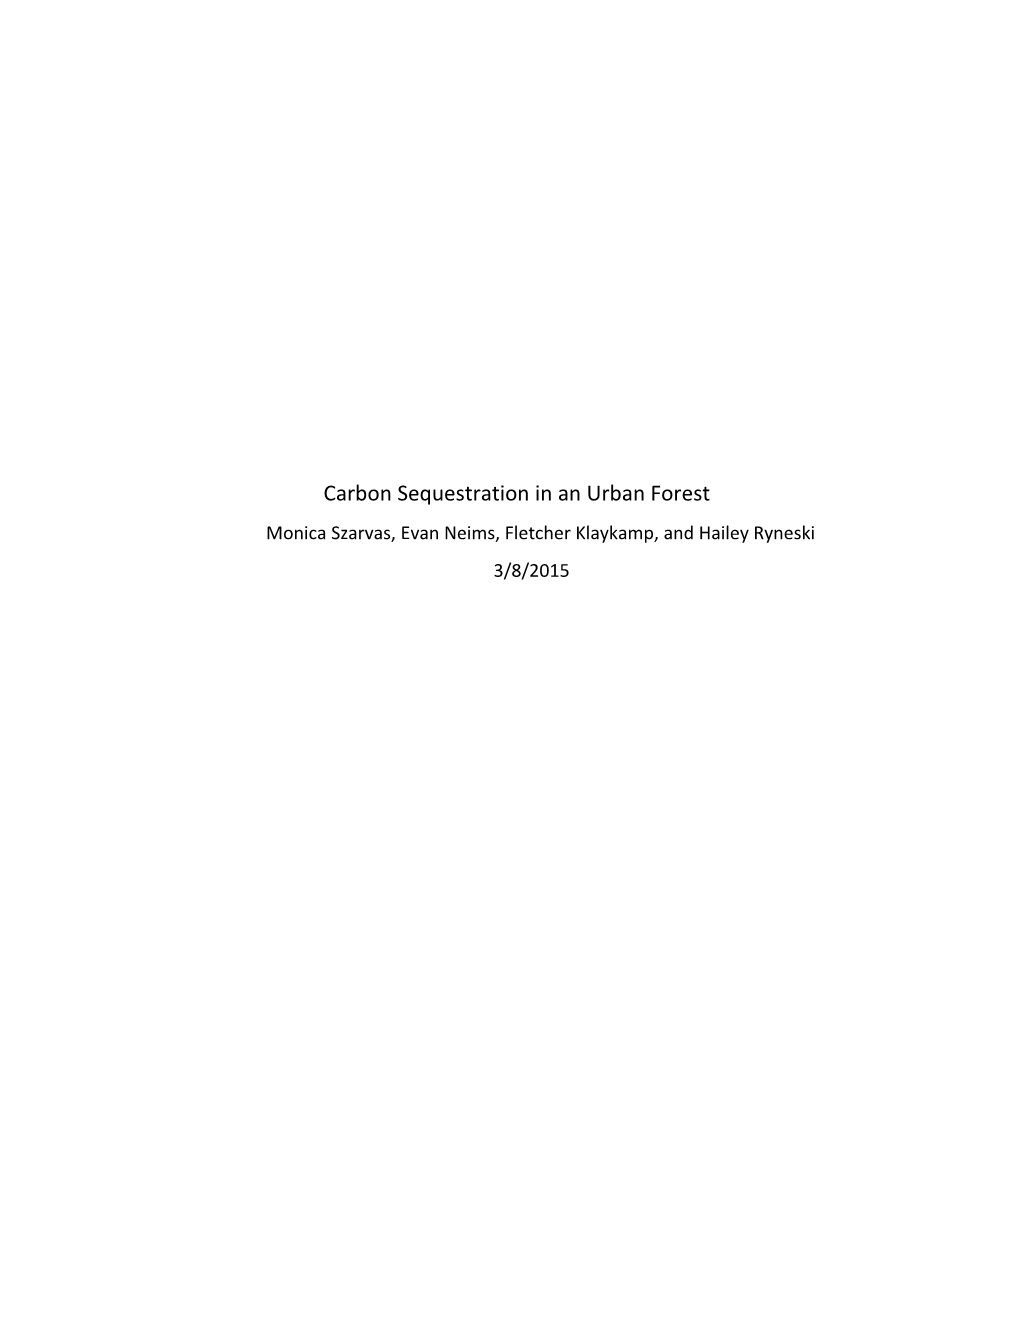 Carbon Sequestration in an Urban Forest